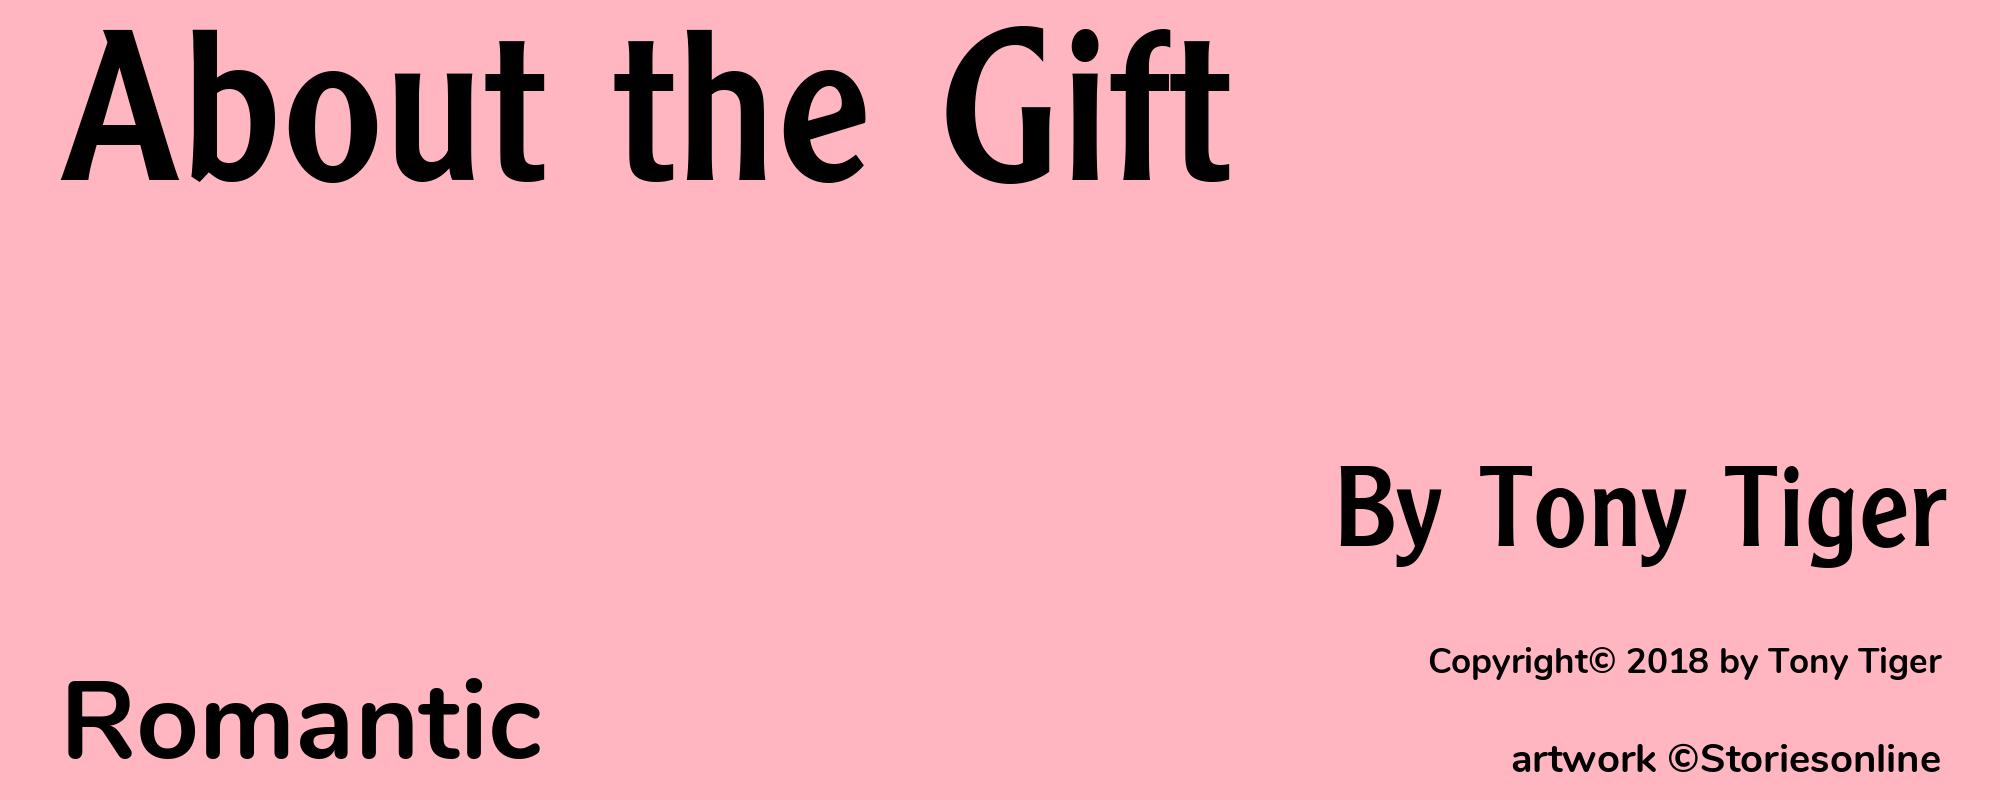 About the Gift - Cover